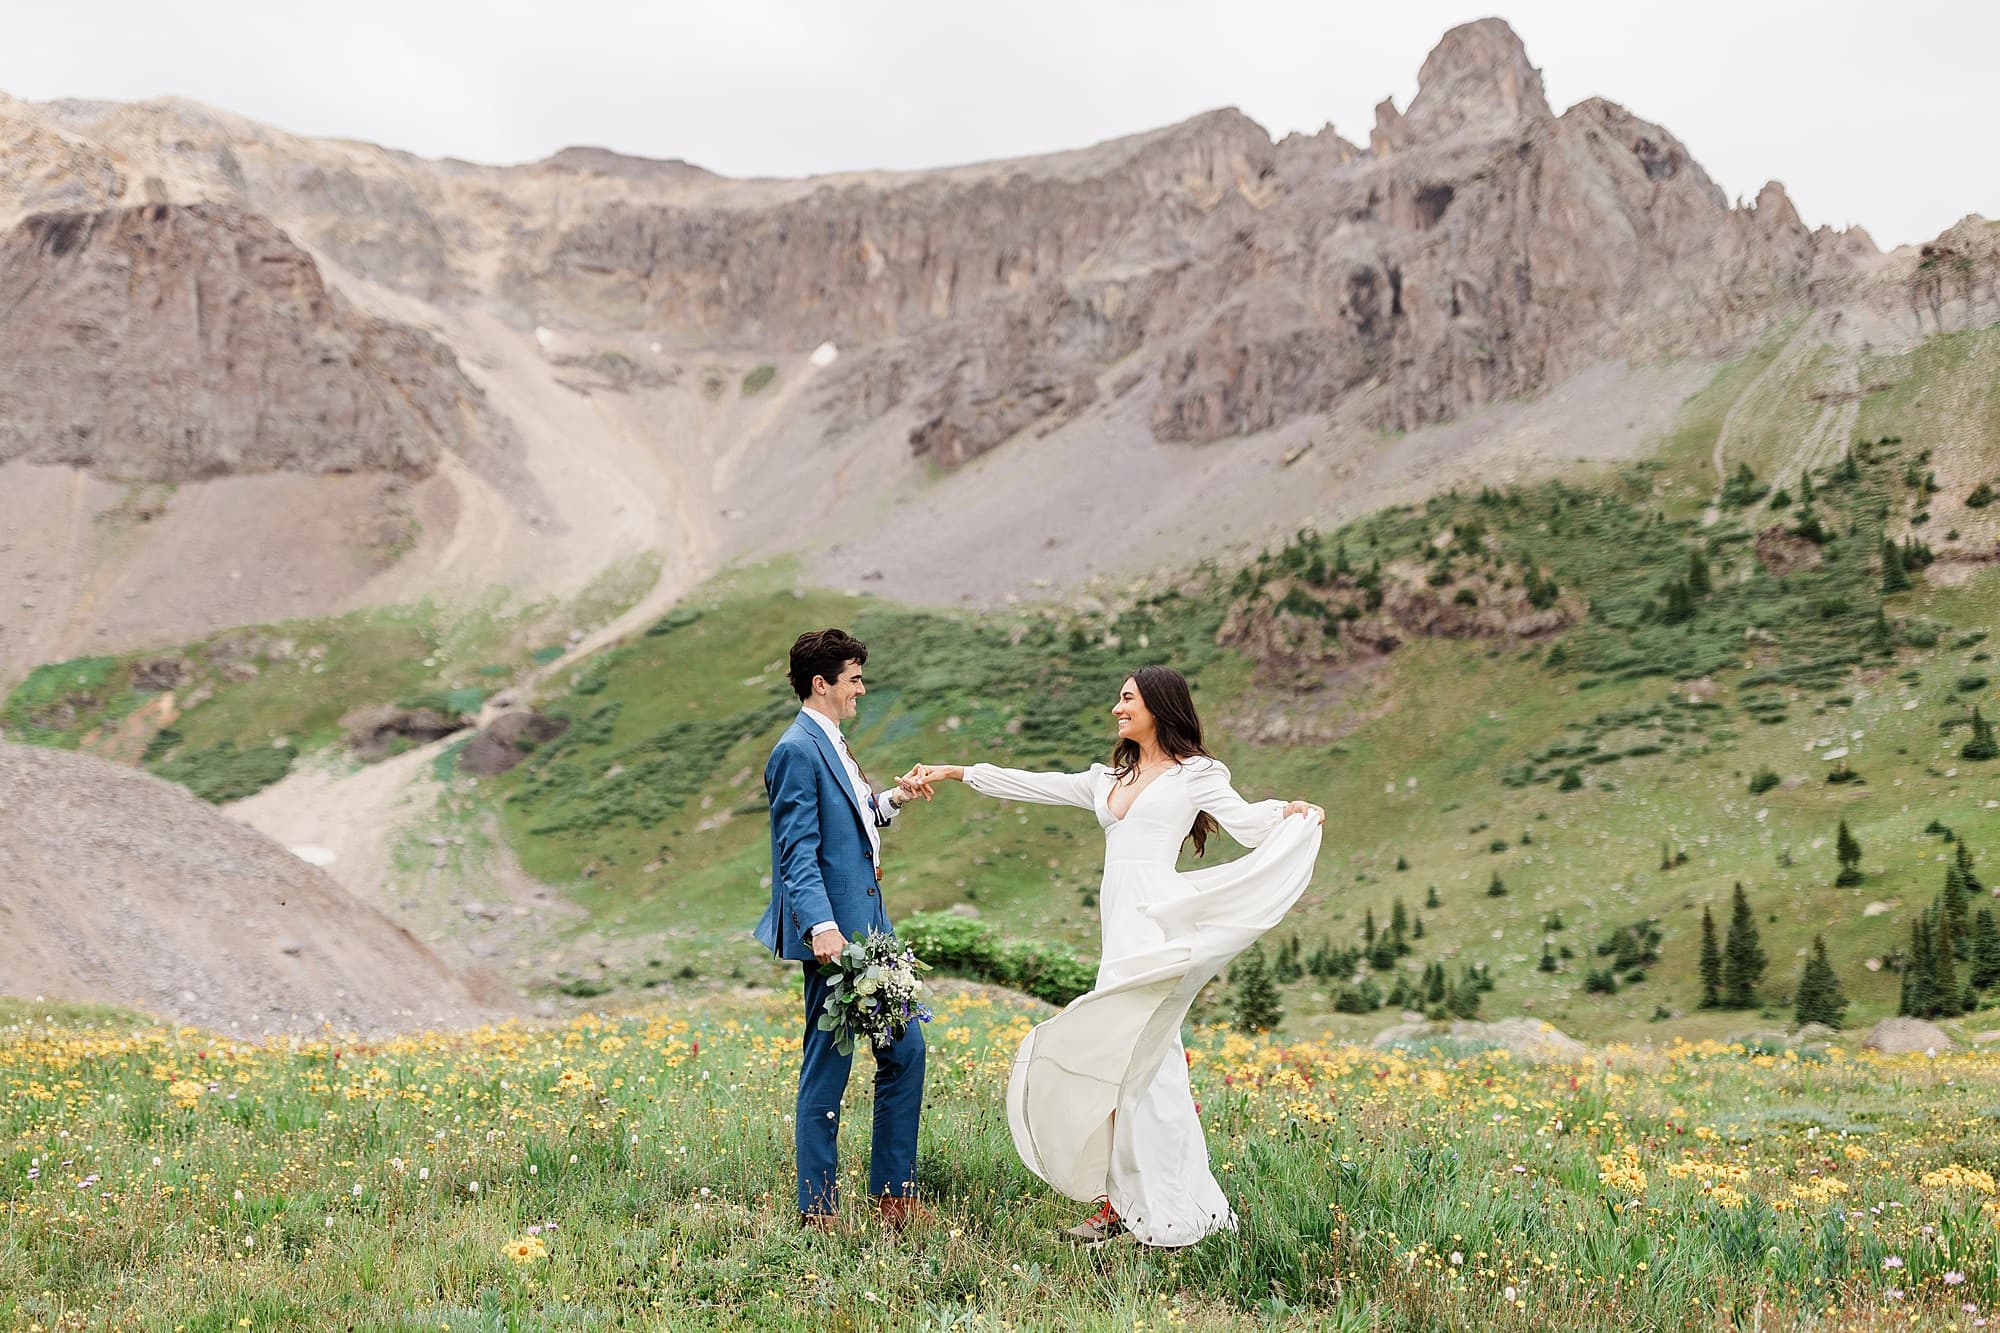 A couple dances in a field of wildflowers in Colordo